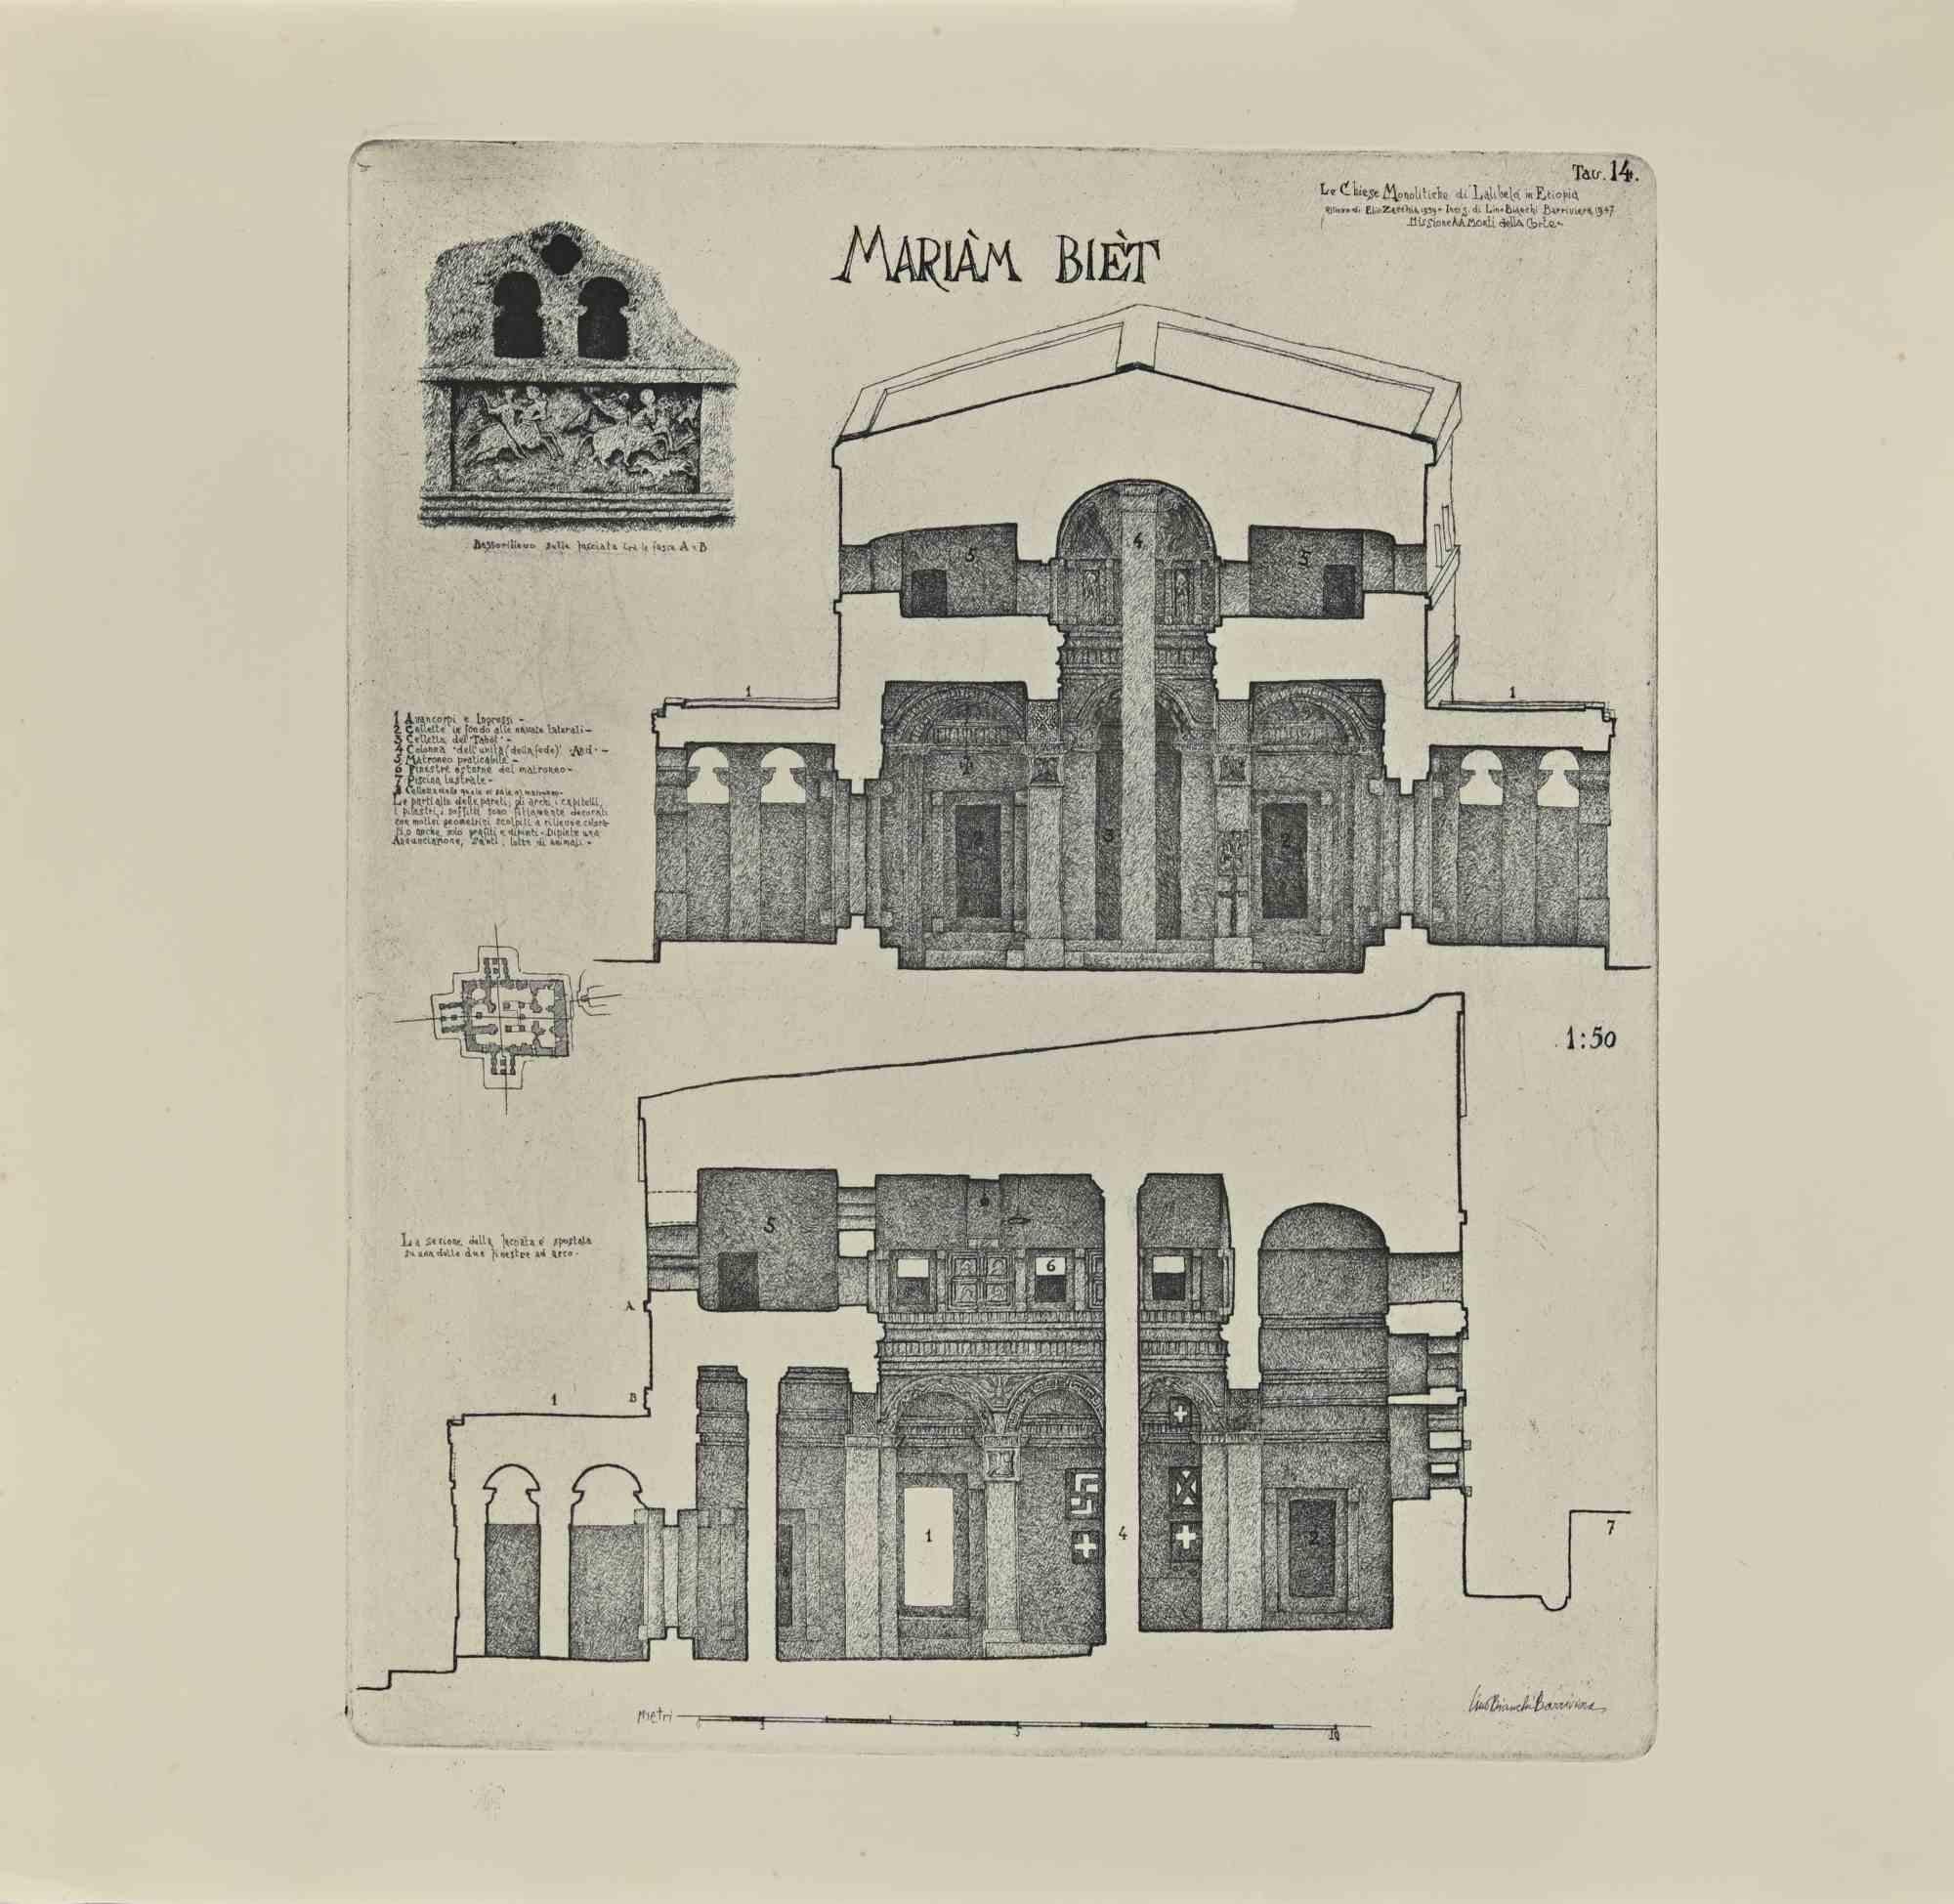 Mariam Biet Section is a modern artwork realized by Lino Bianchi Barriviera in 1948.

Black and white etching.

Signed on plate.

Plate n.14 (as reported on the higher margin).

The artwork is from the series "The monolithic churches of Lalibelà and